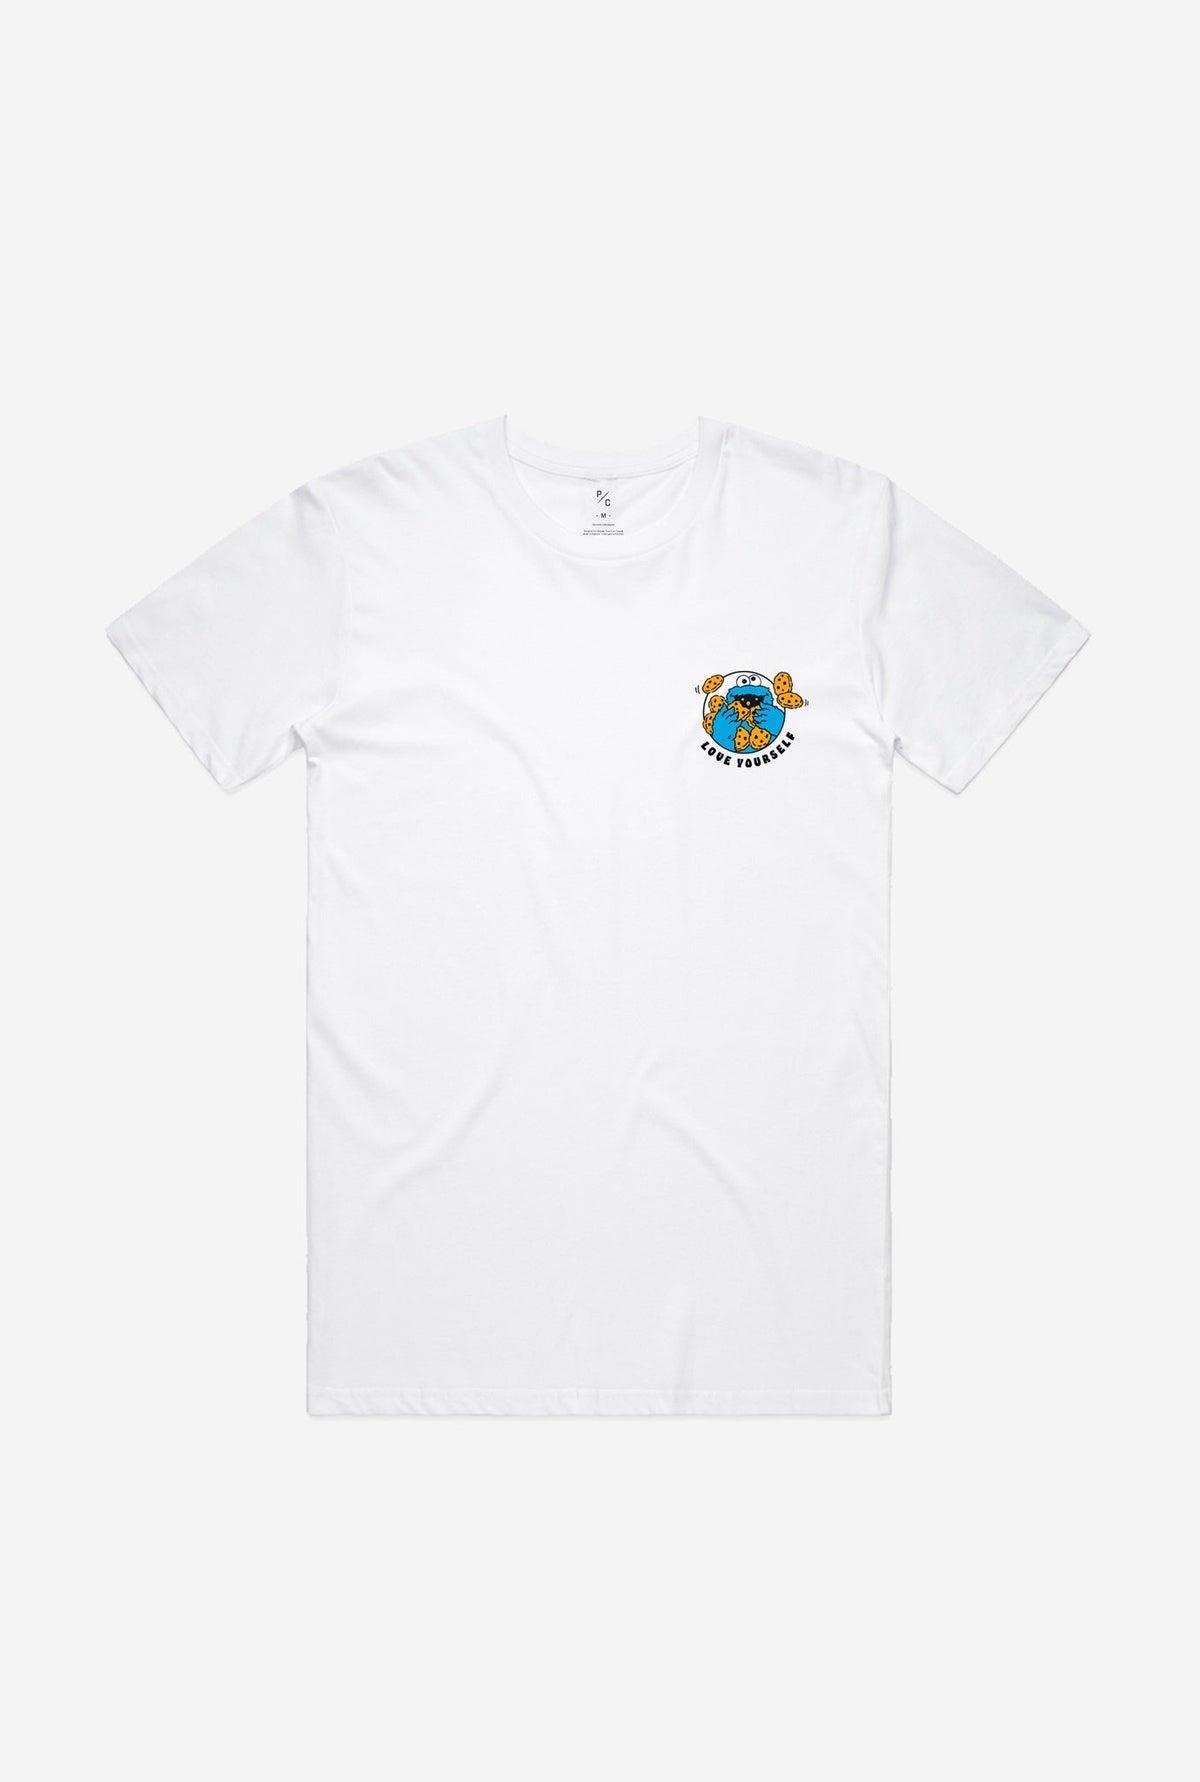 Love Yourself Cookie Monster T-Shirt - White